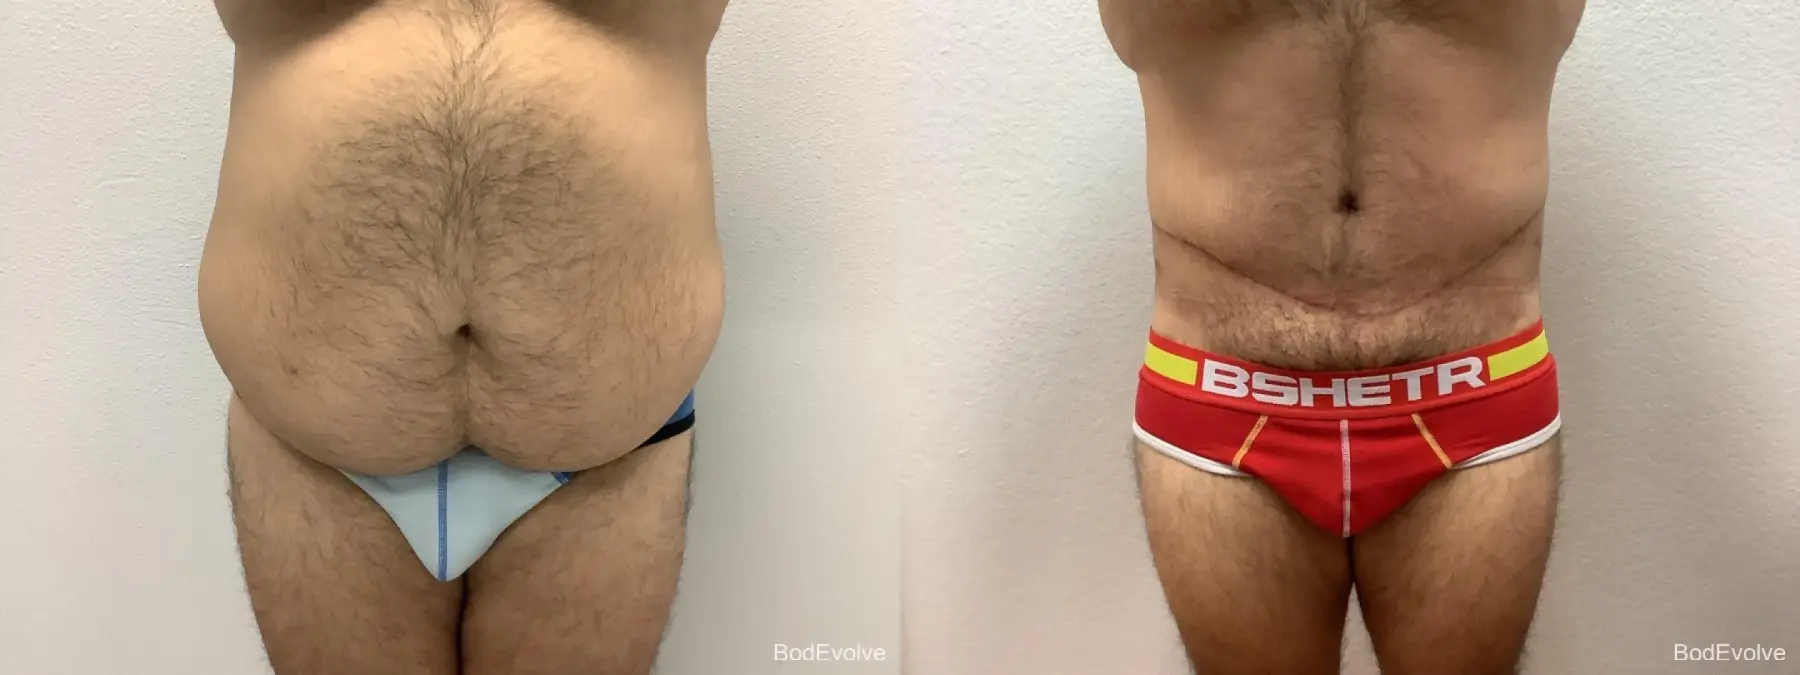 Male Bodylift: Patient 2 - Before and After  